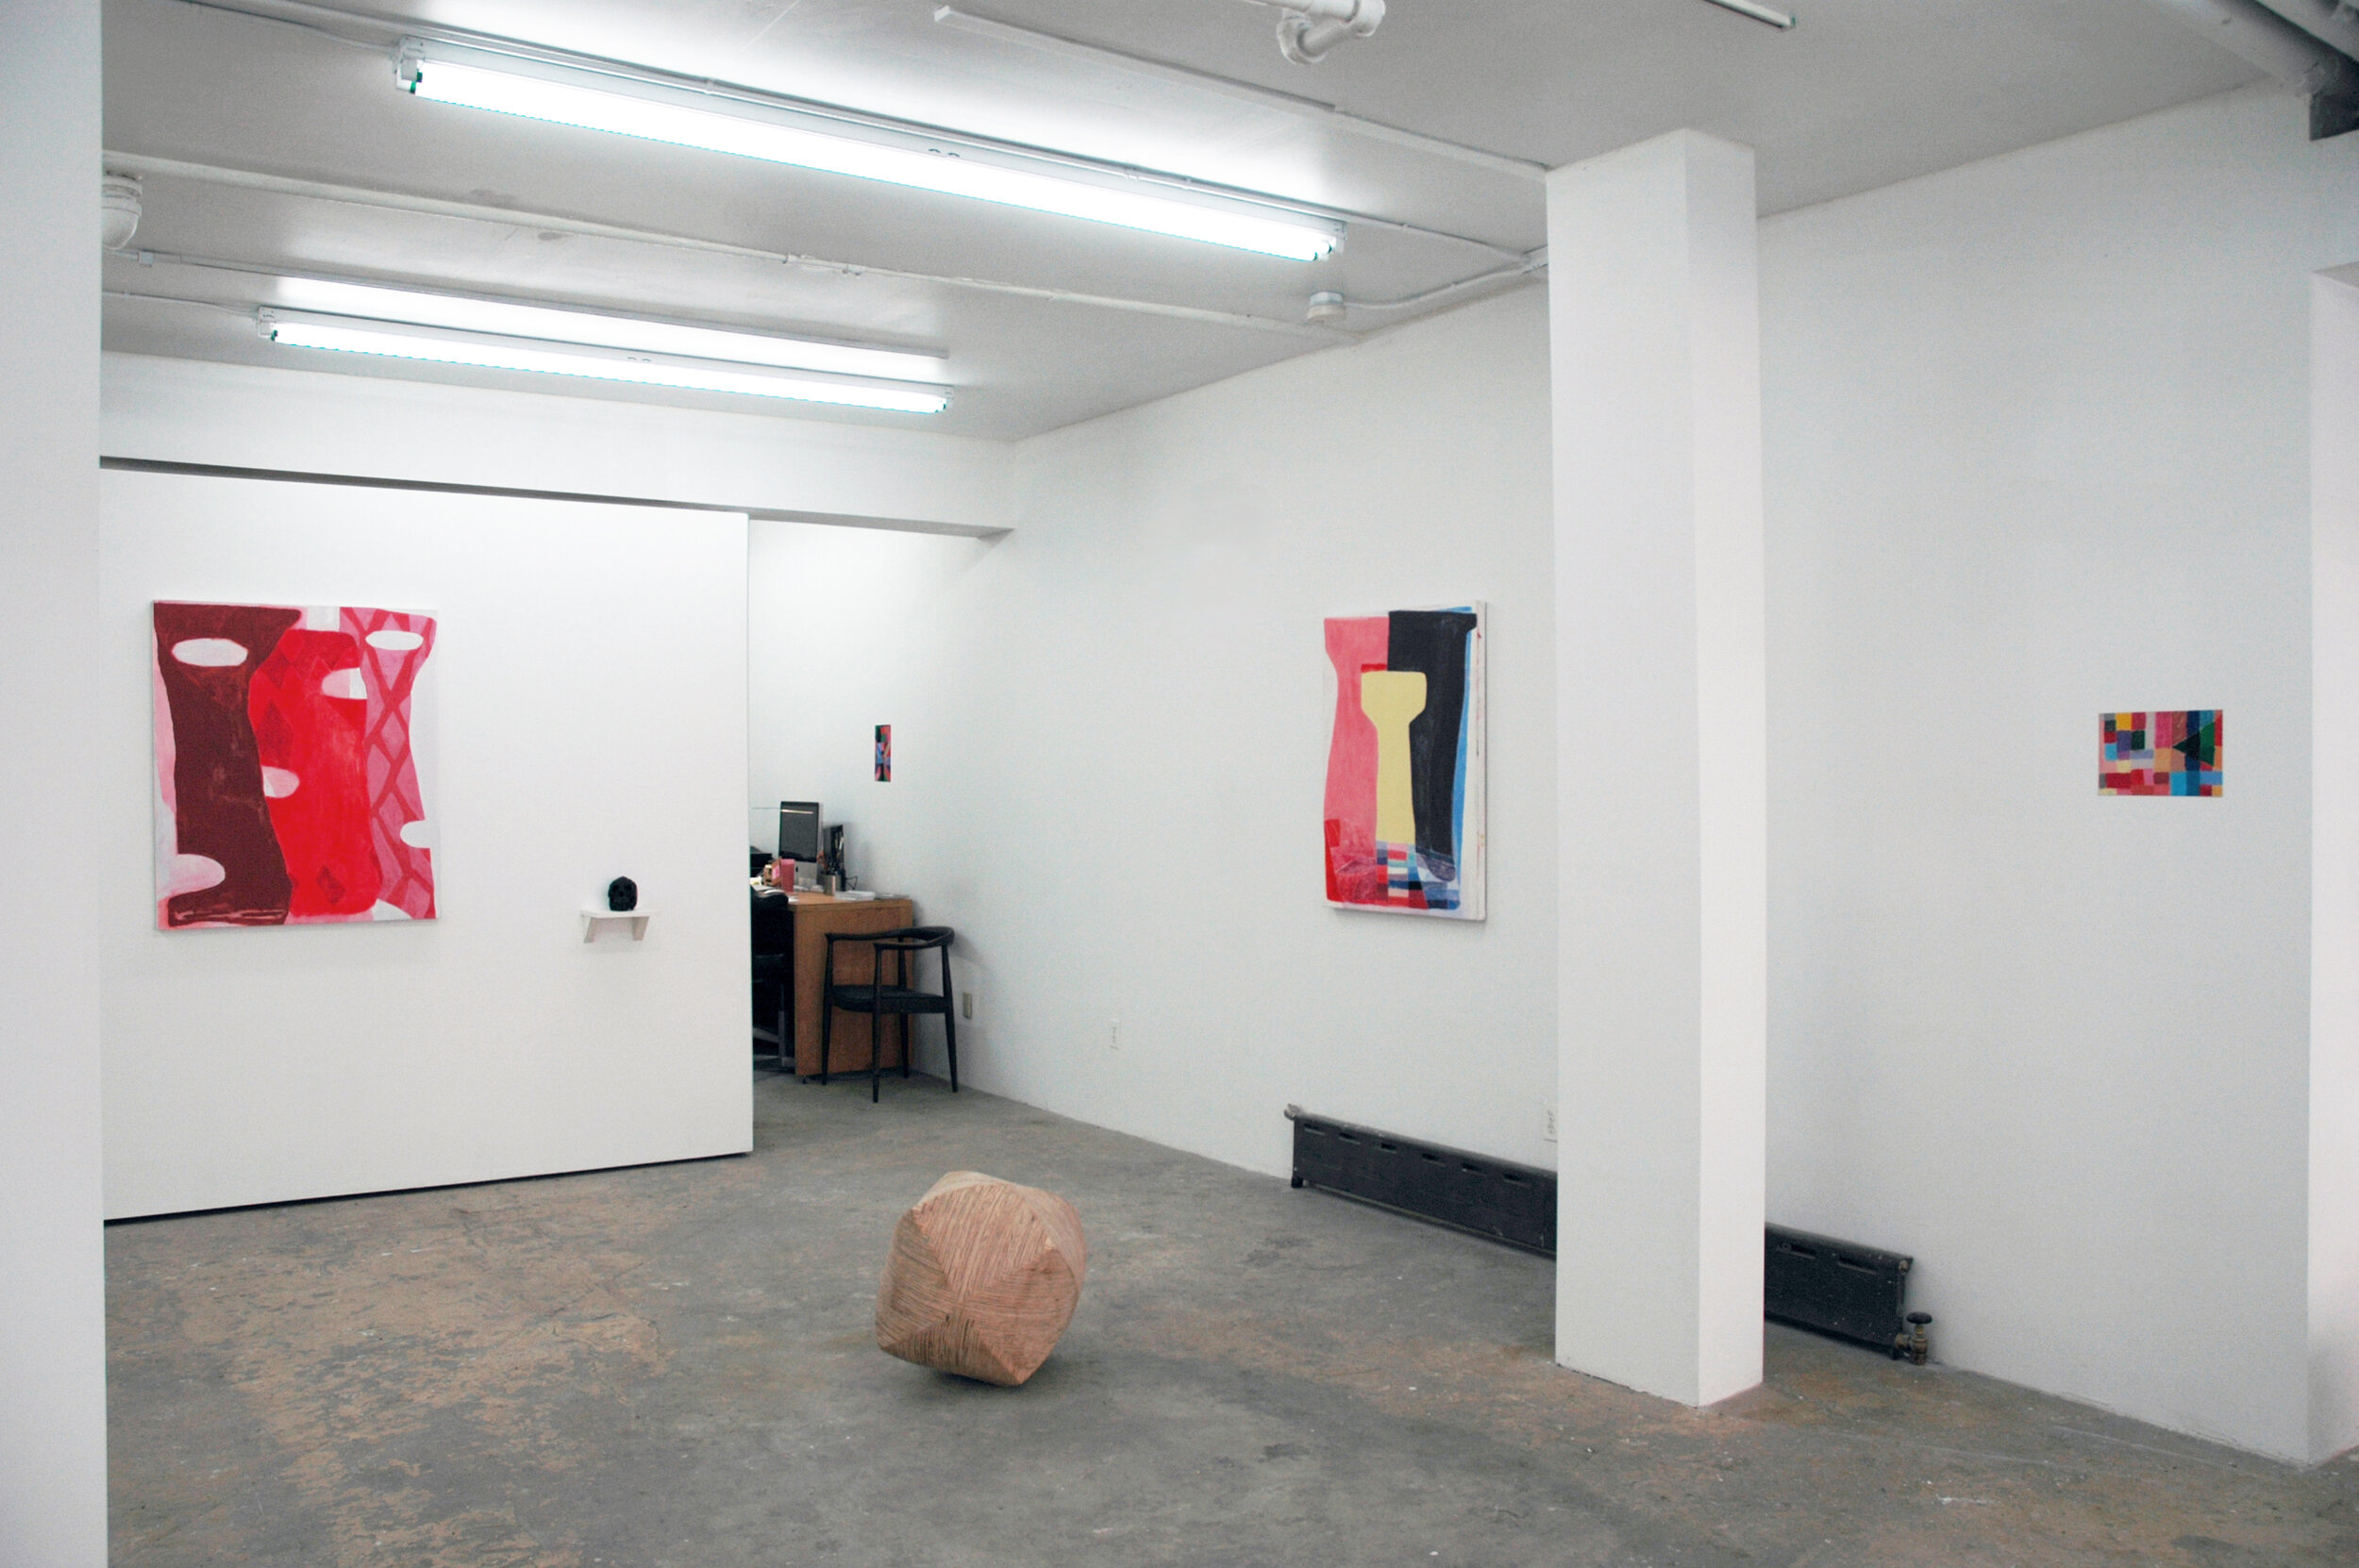 Installation image from the 2012 Charles Dunn exhibition, hell on earth, at Cindy Rucker Gallery